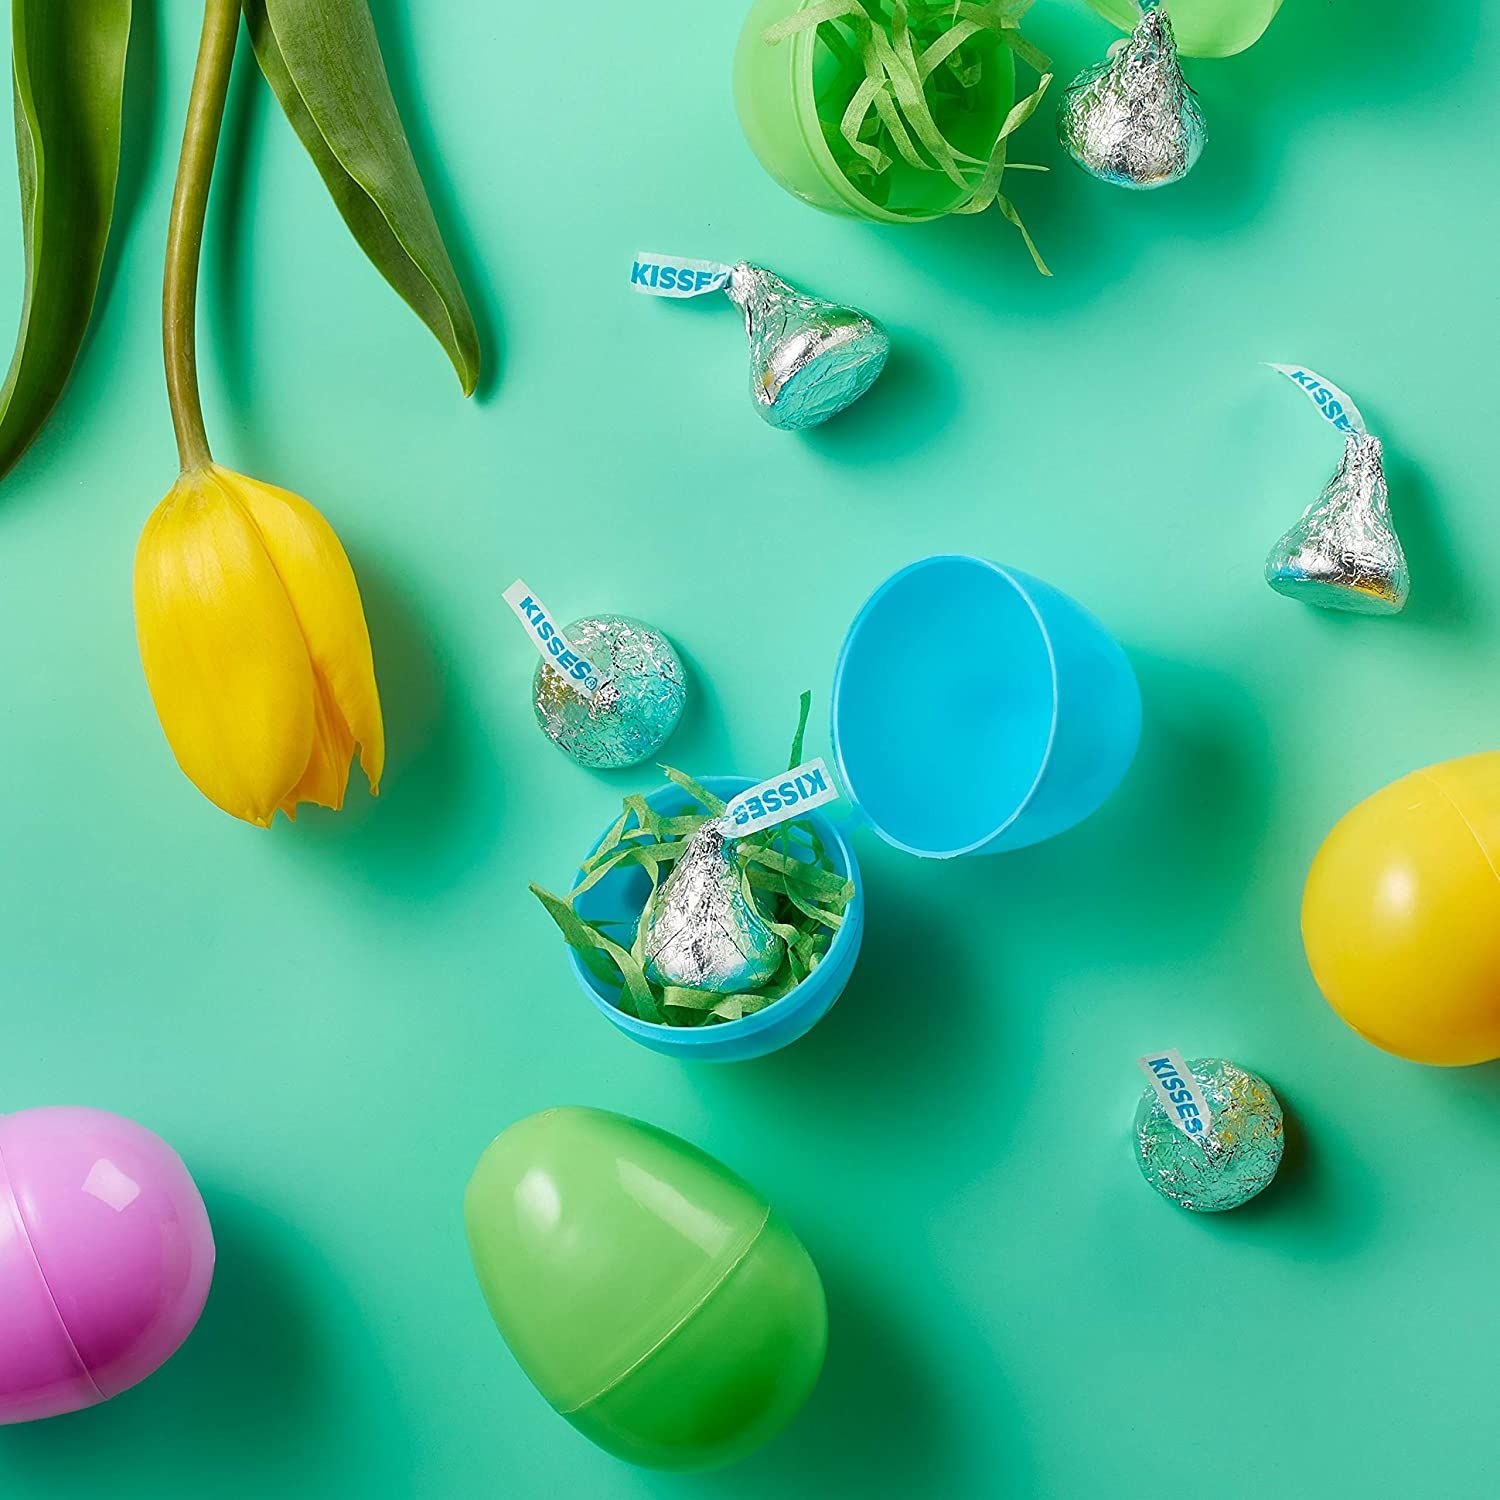 Amazon Is Having A Huge Sale On Easter Candy Like Hershey Kisses, Reese's, And More